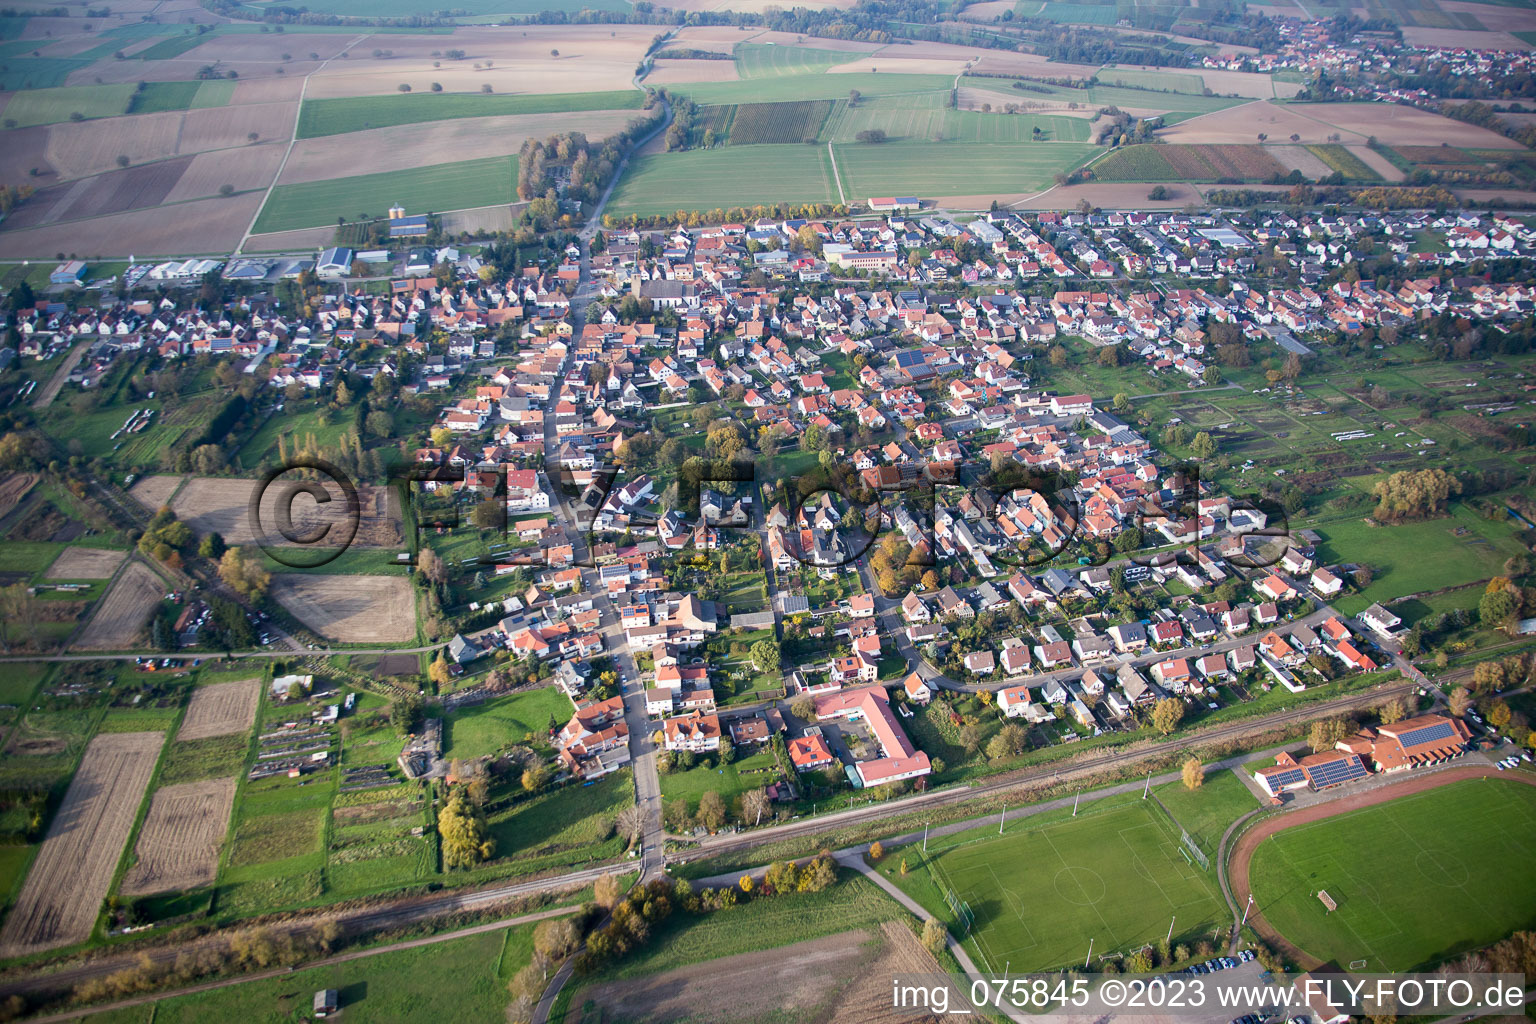 Steinfeld in the state Rhineland-Palatinate, Germany seen from above